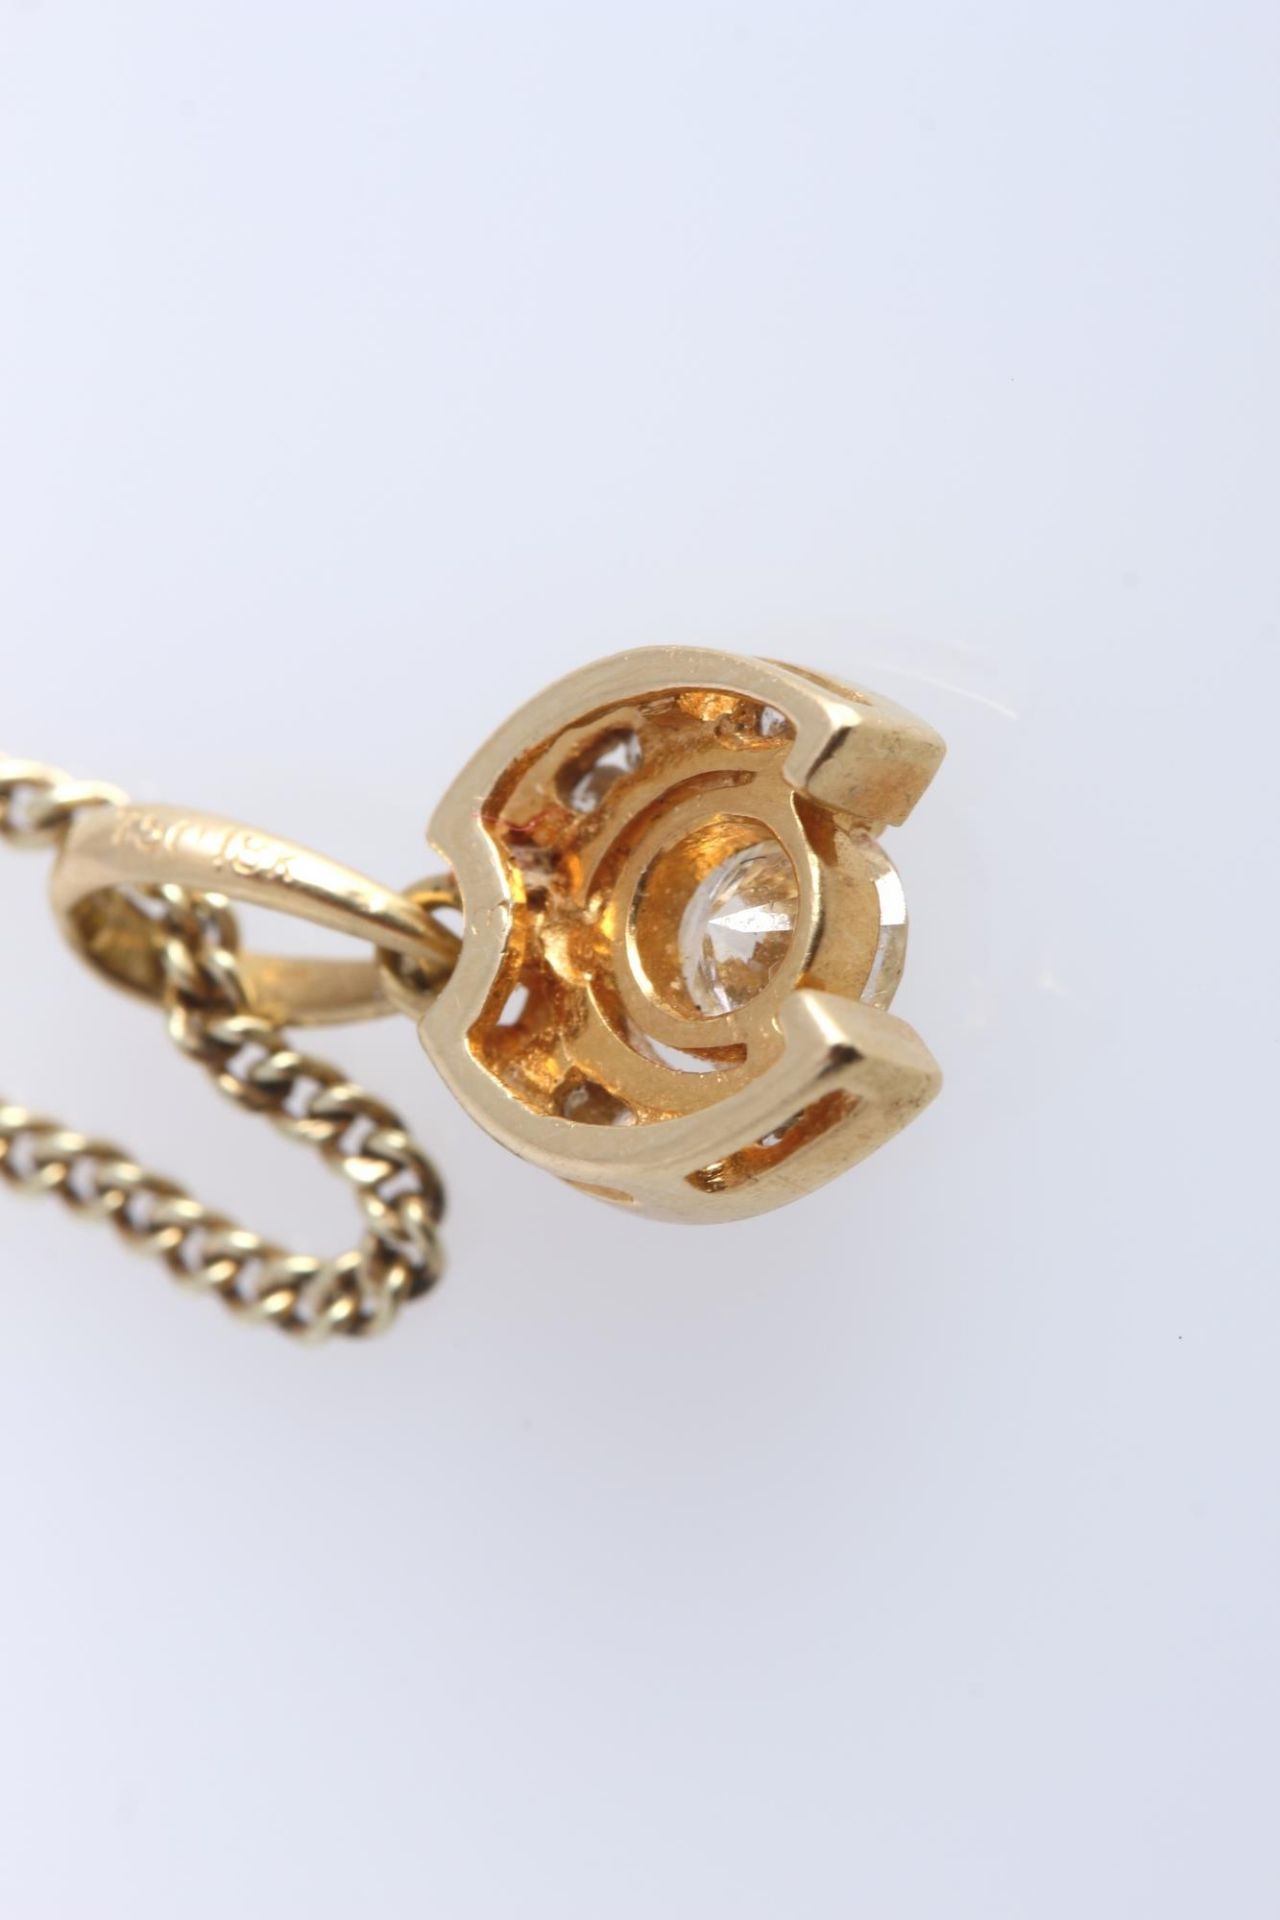 750 Gold Hufeisenanhänger Brillant 0.25ct an 585 Gold Kette, 18K diamond pendant with 14K necklace, - Image 4 of 5